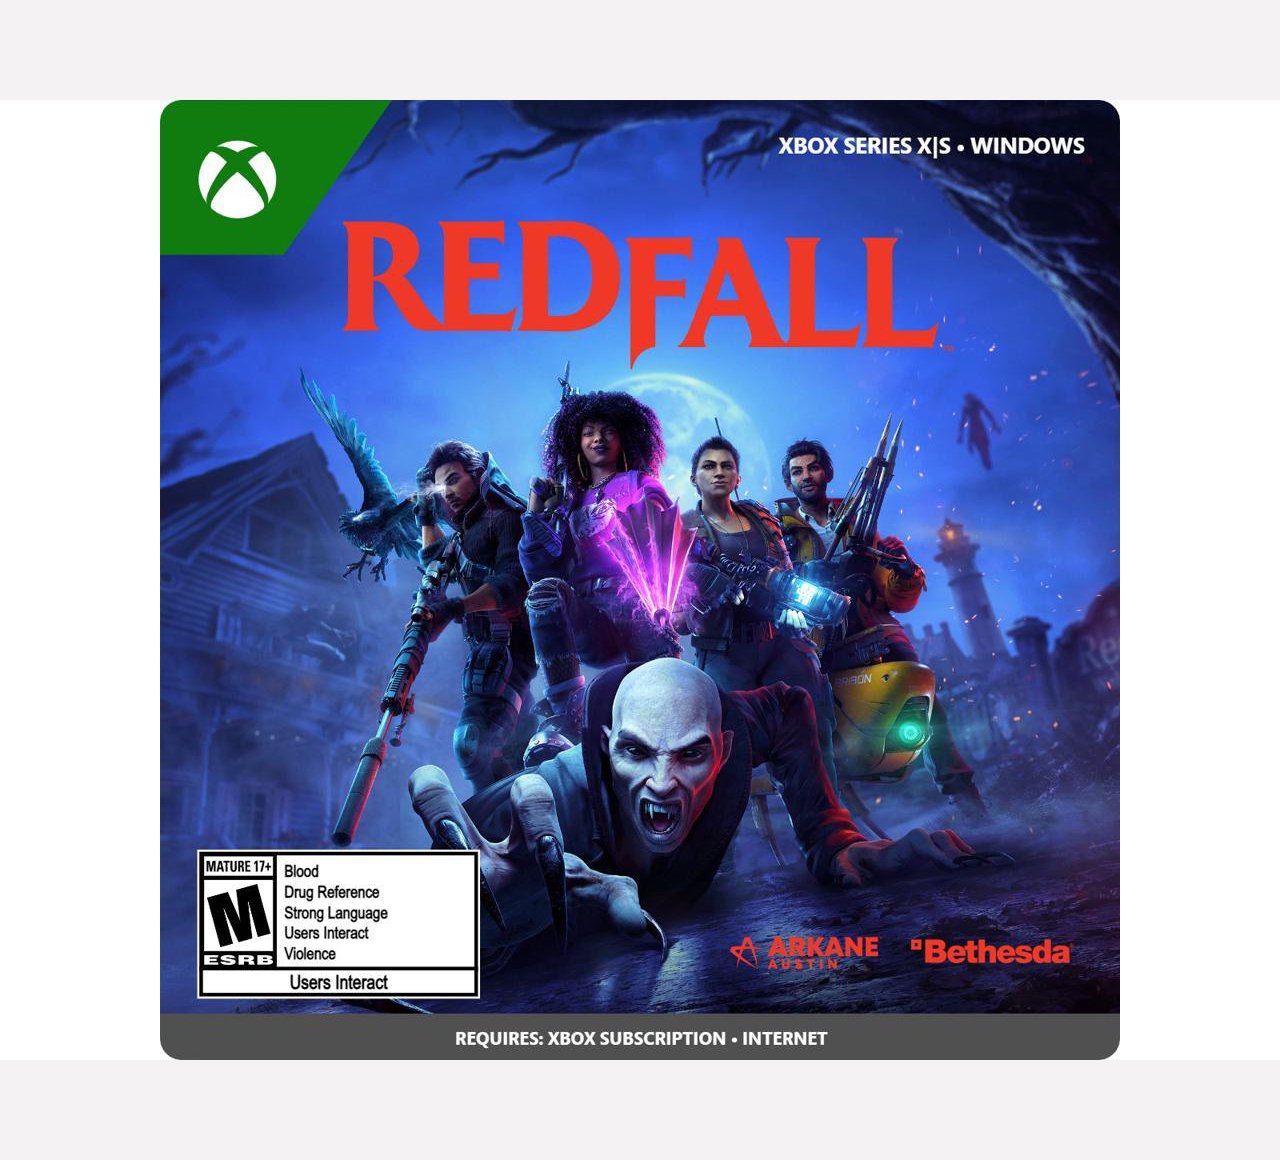 Redfall Bite Back Upgrade [ Not a Disc ] (XBOX SERIES X) NEW